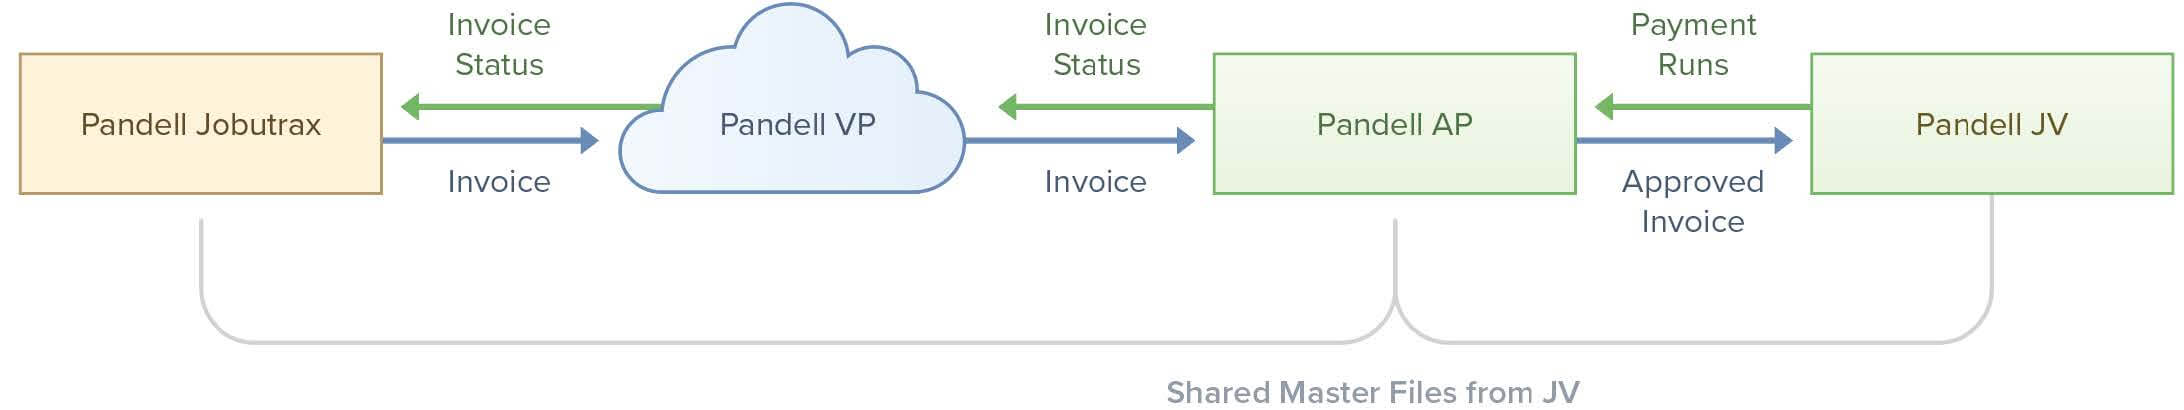 Diagram illustrating the accounting workflow between a vendor and an energy company using Pandell's end-to-end financial suite